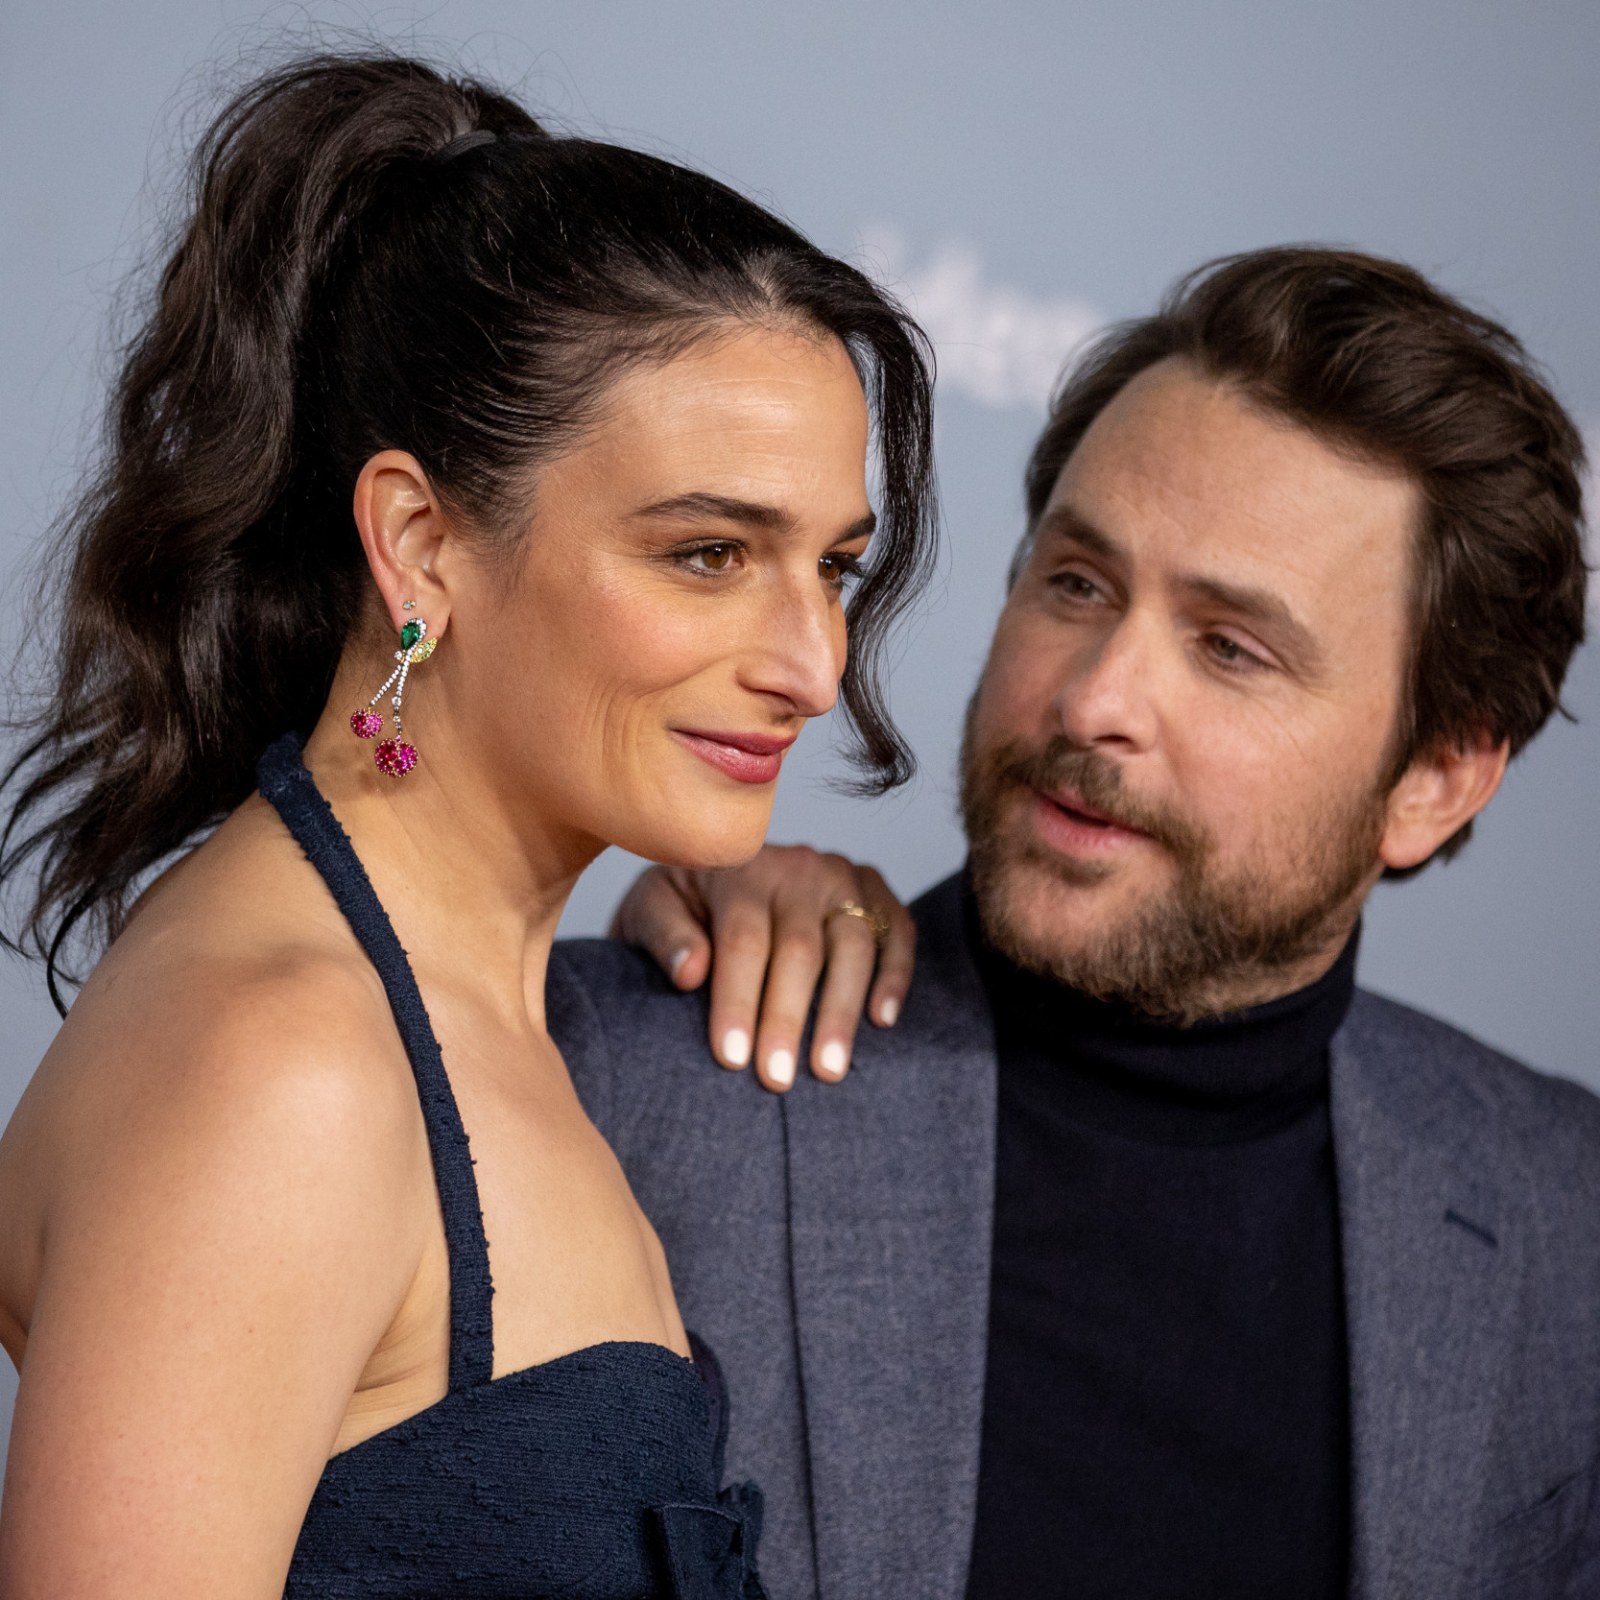 Charlie Day and Jenny Slate on Drunk Acting and Threesomes for 'I Want You  Back' Movie